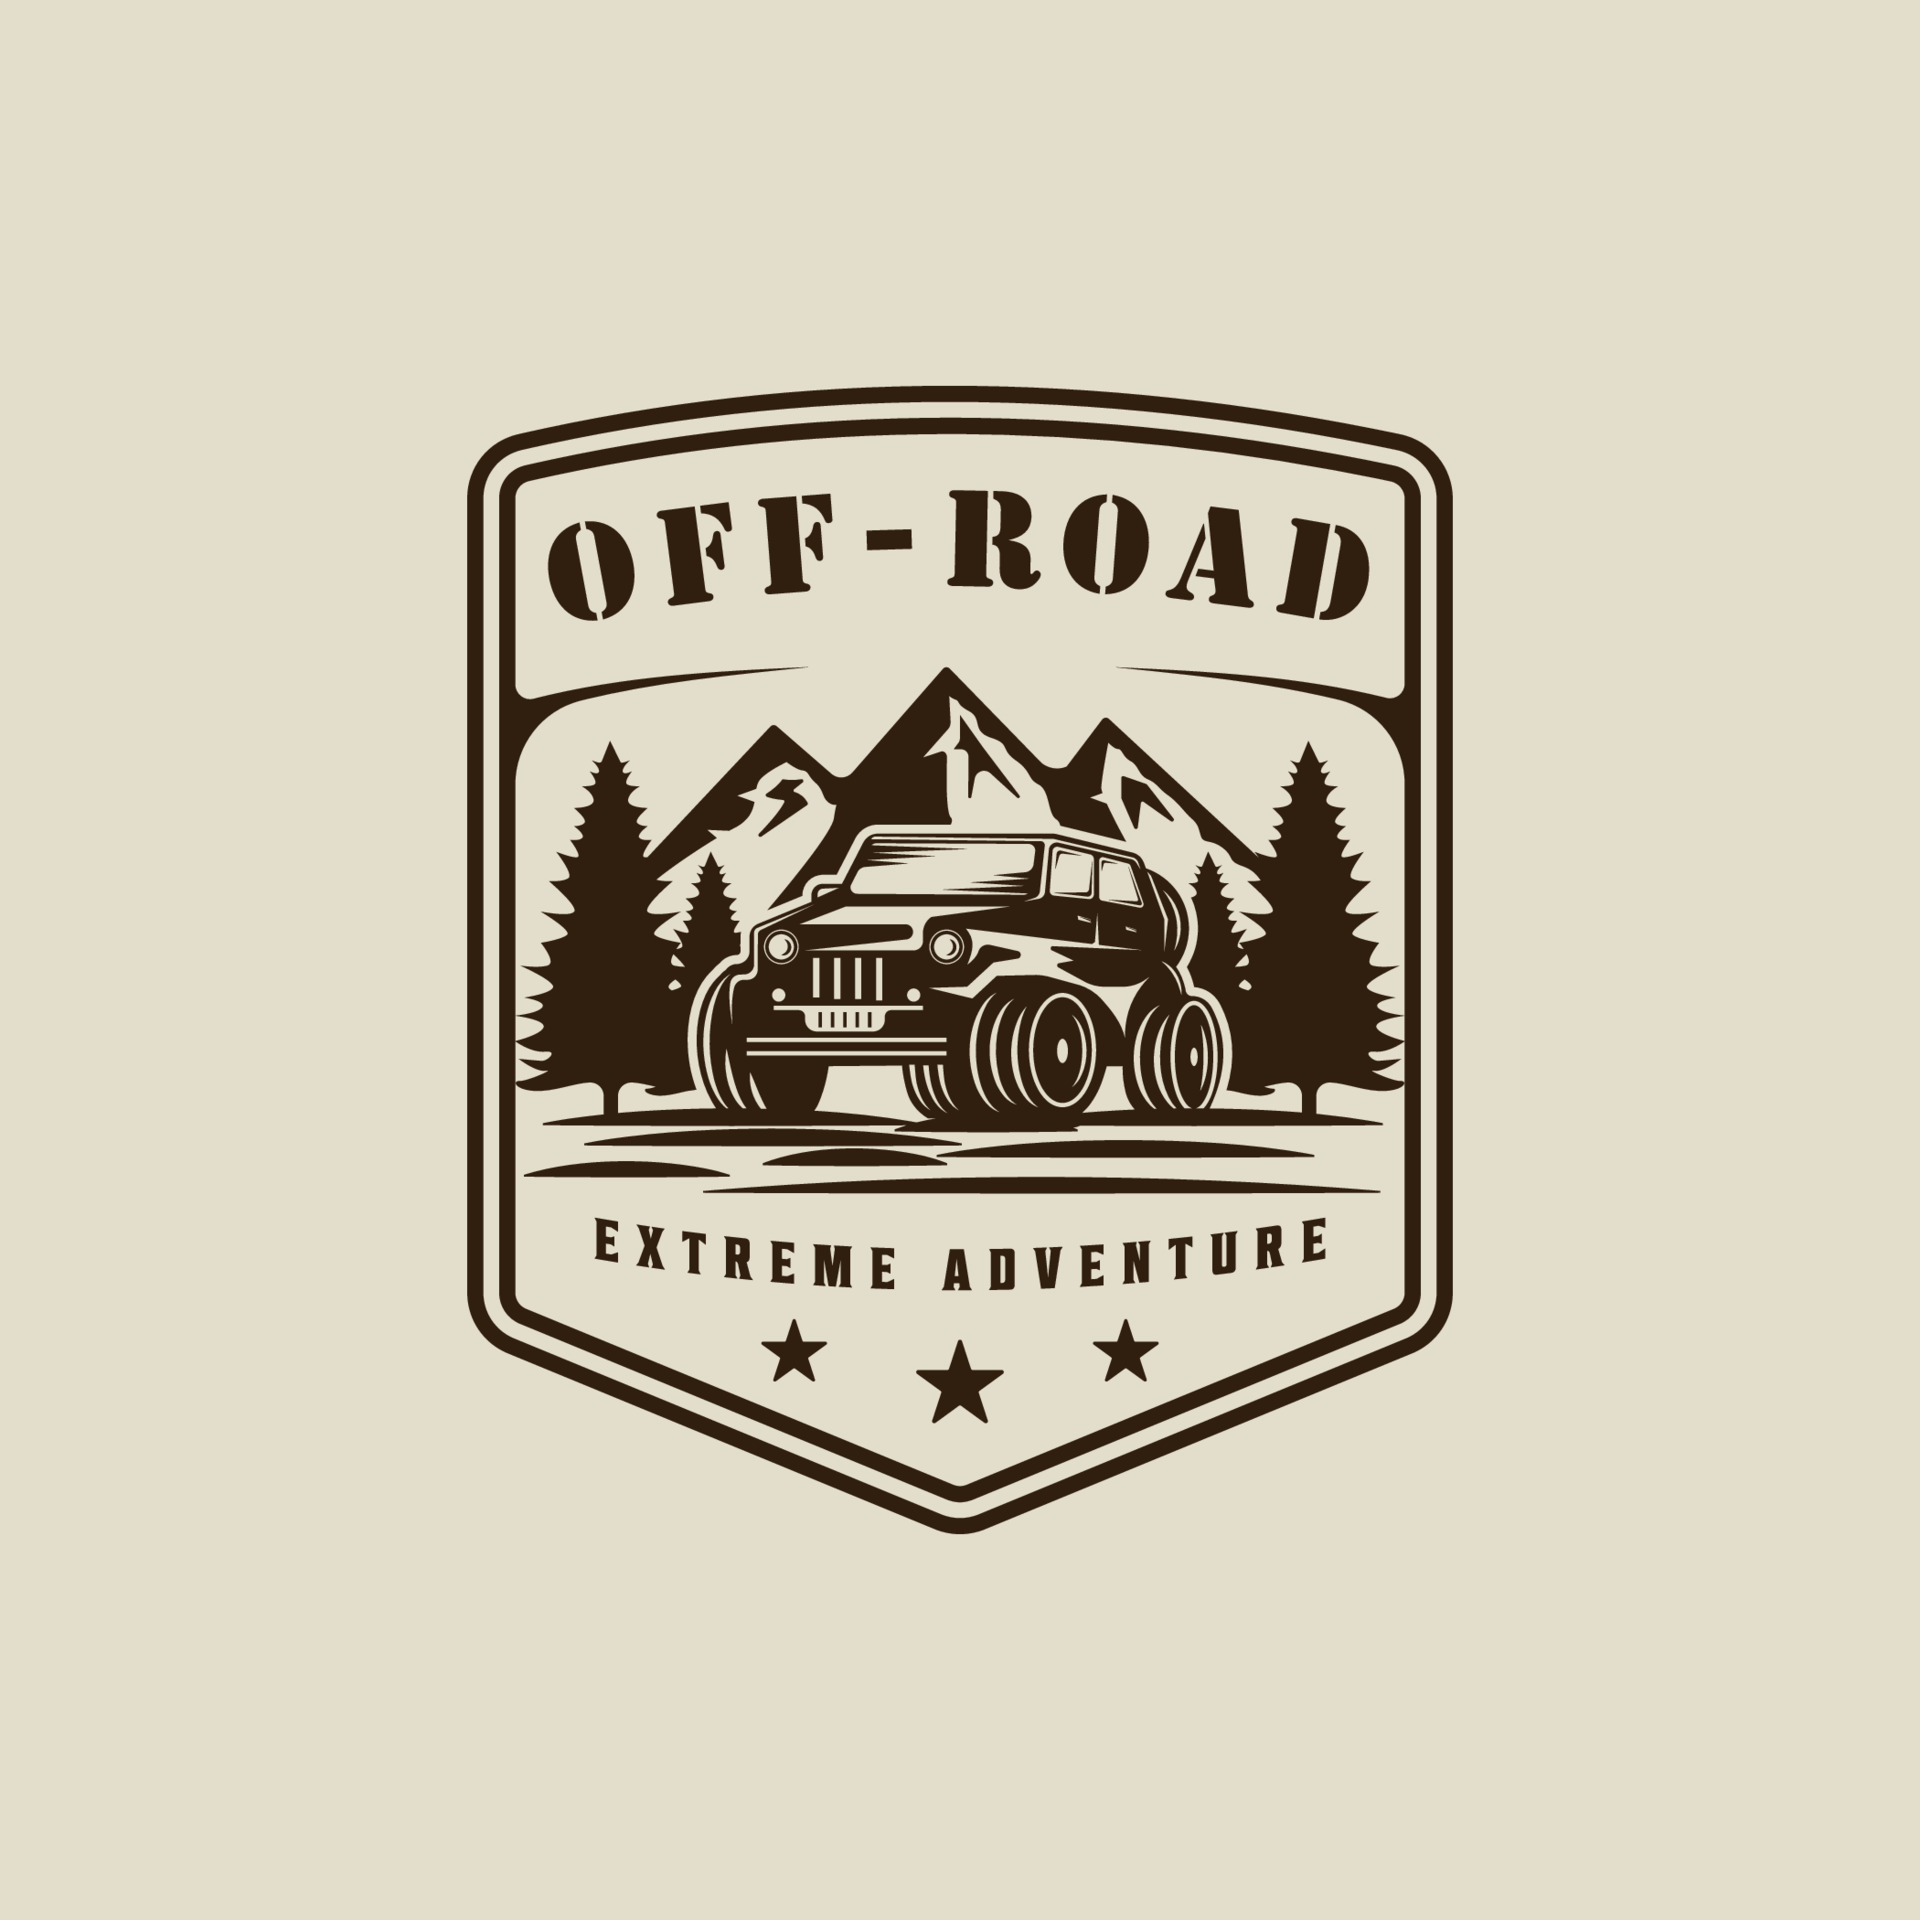 off road car logo vintage vector illustration template icon graphic design.  vehicle for adventure outdoor with mountain and pine tree landscape sign or  symbol with retro typography with badge 23889829 Vector Art